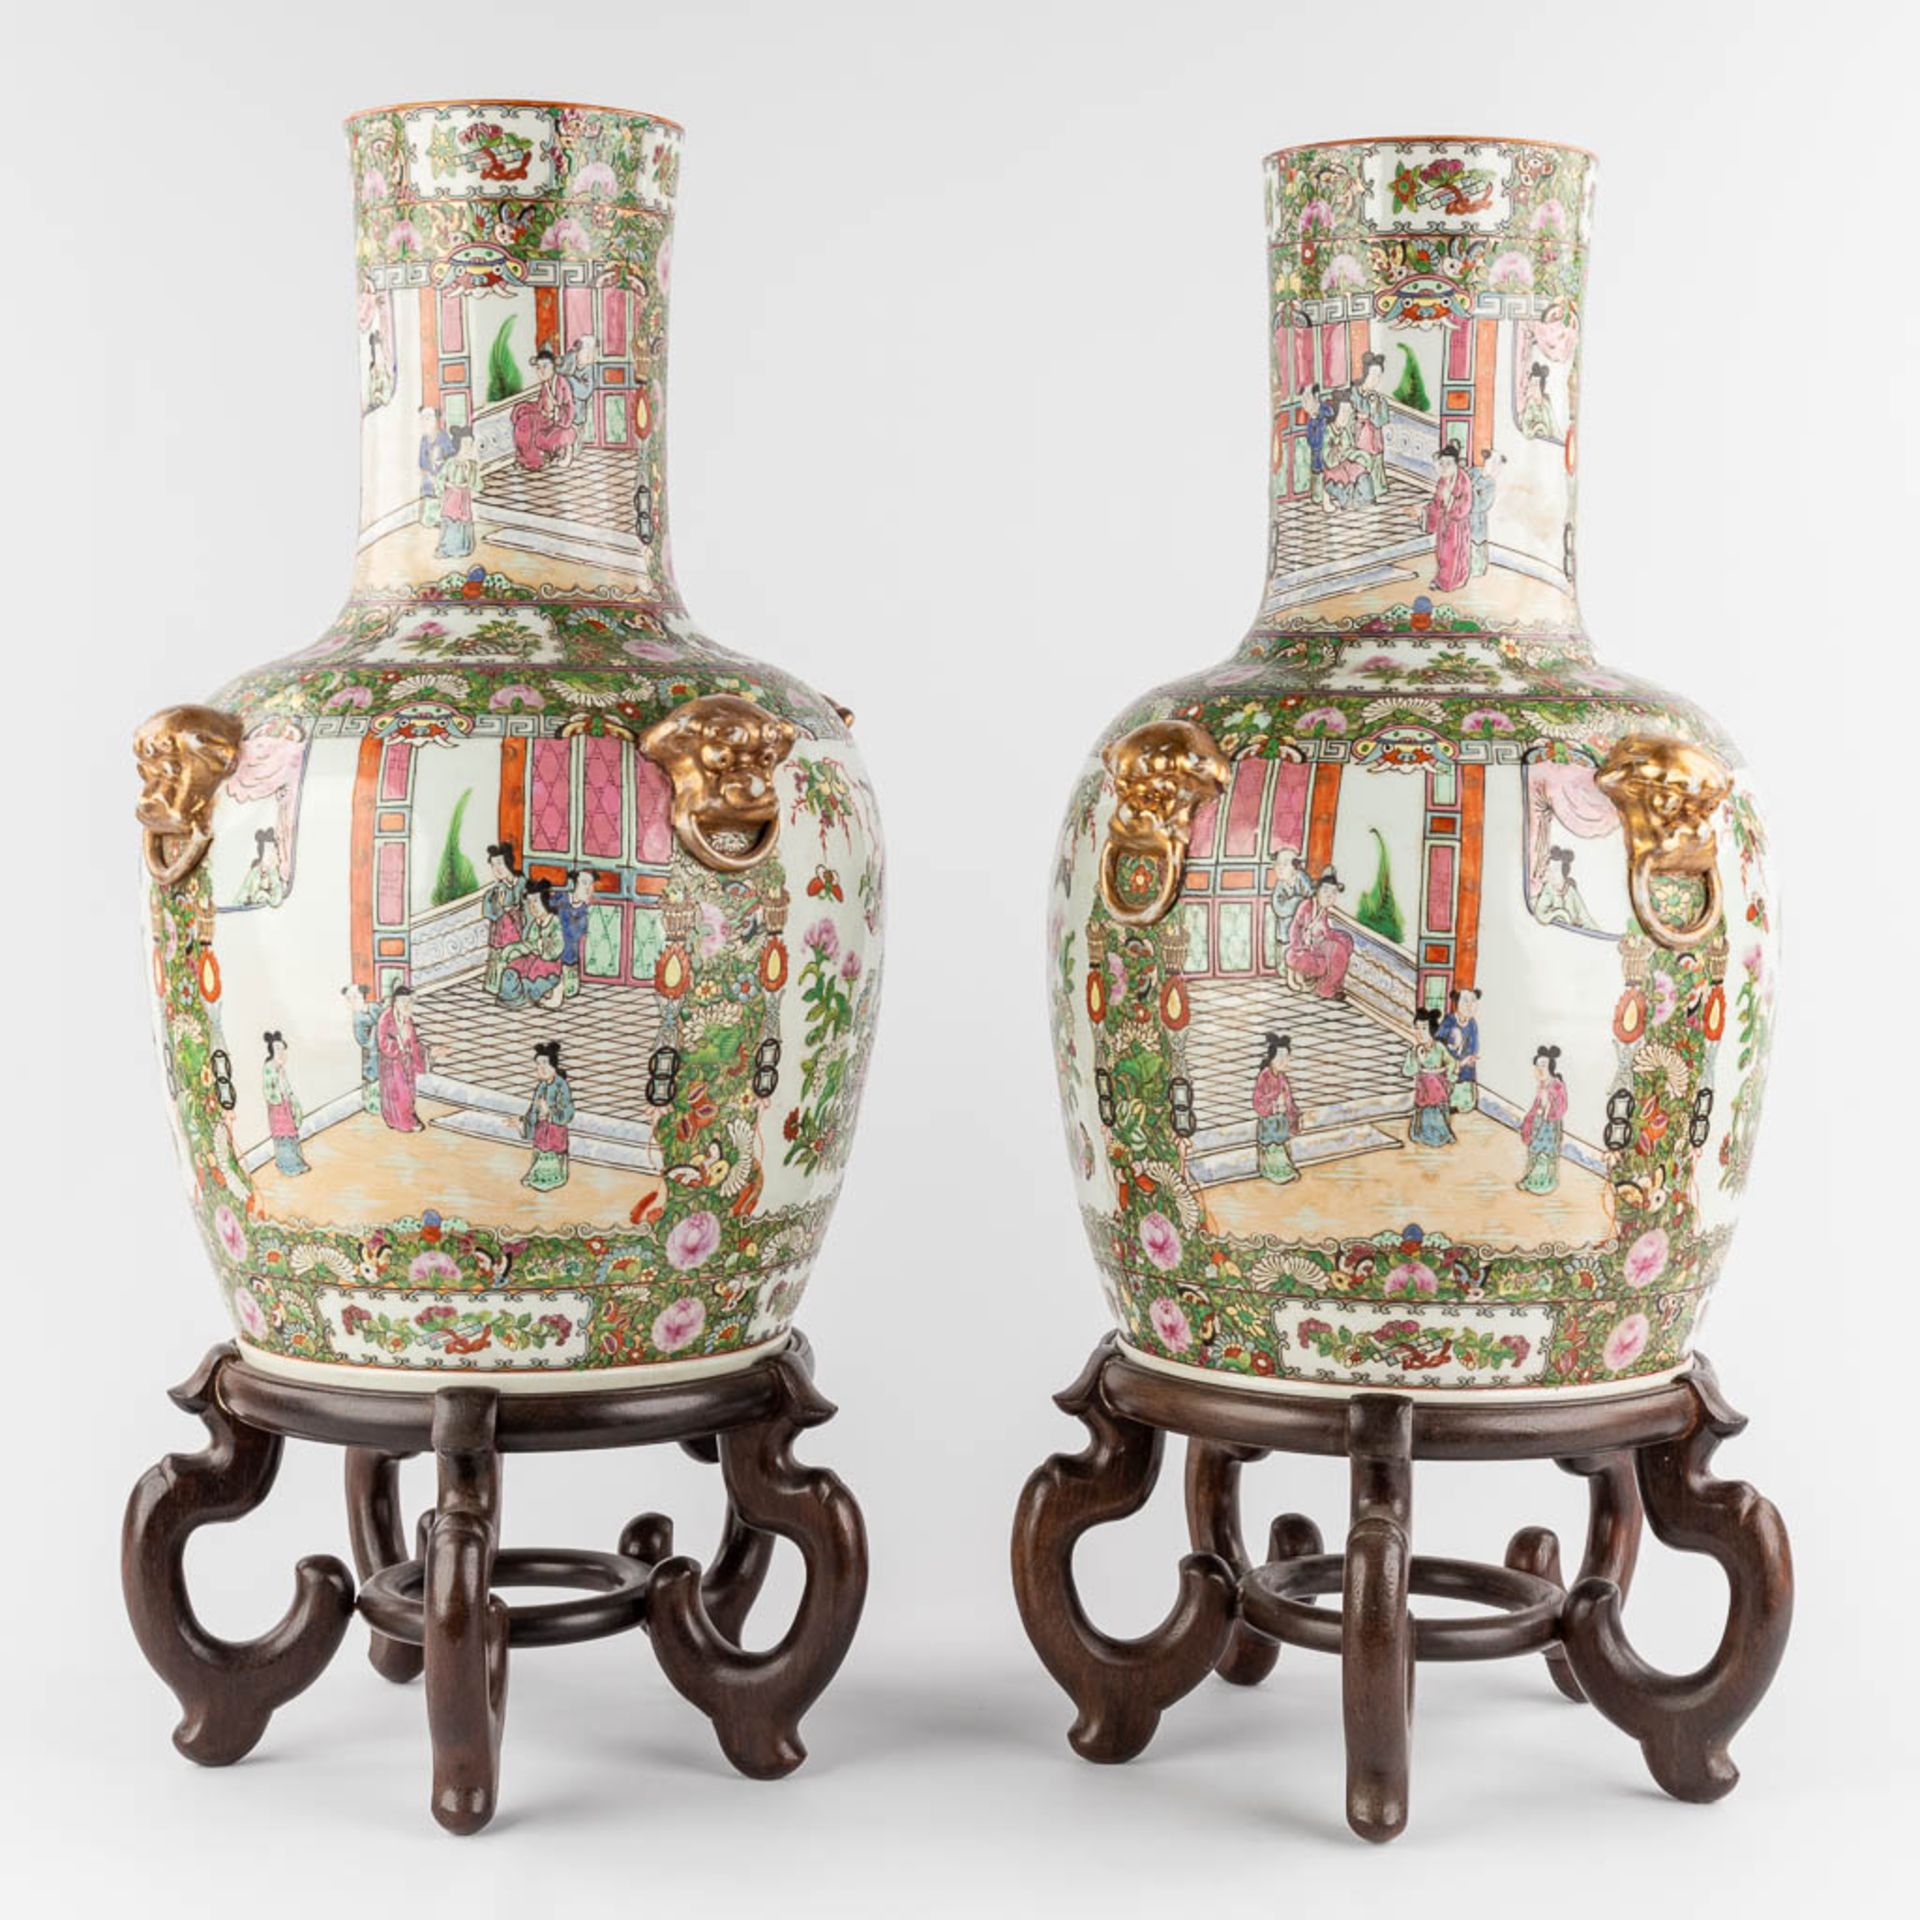 Two large Chinese Canton vases on a pedestal, 20th C. (H:50 x D:32 cm) - Image 5 of 15